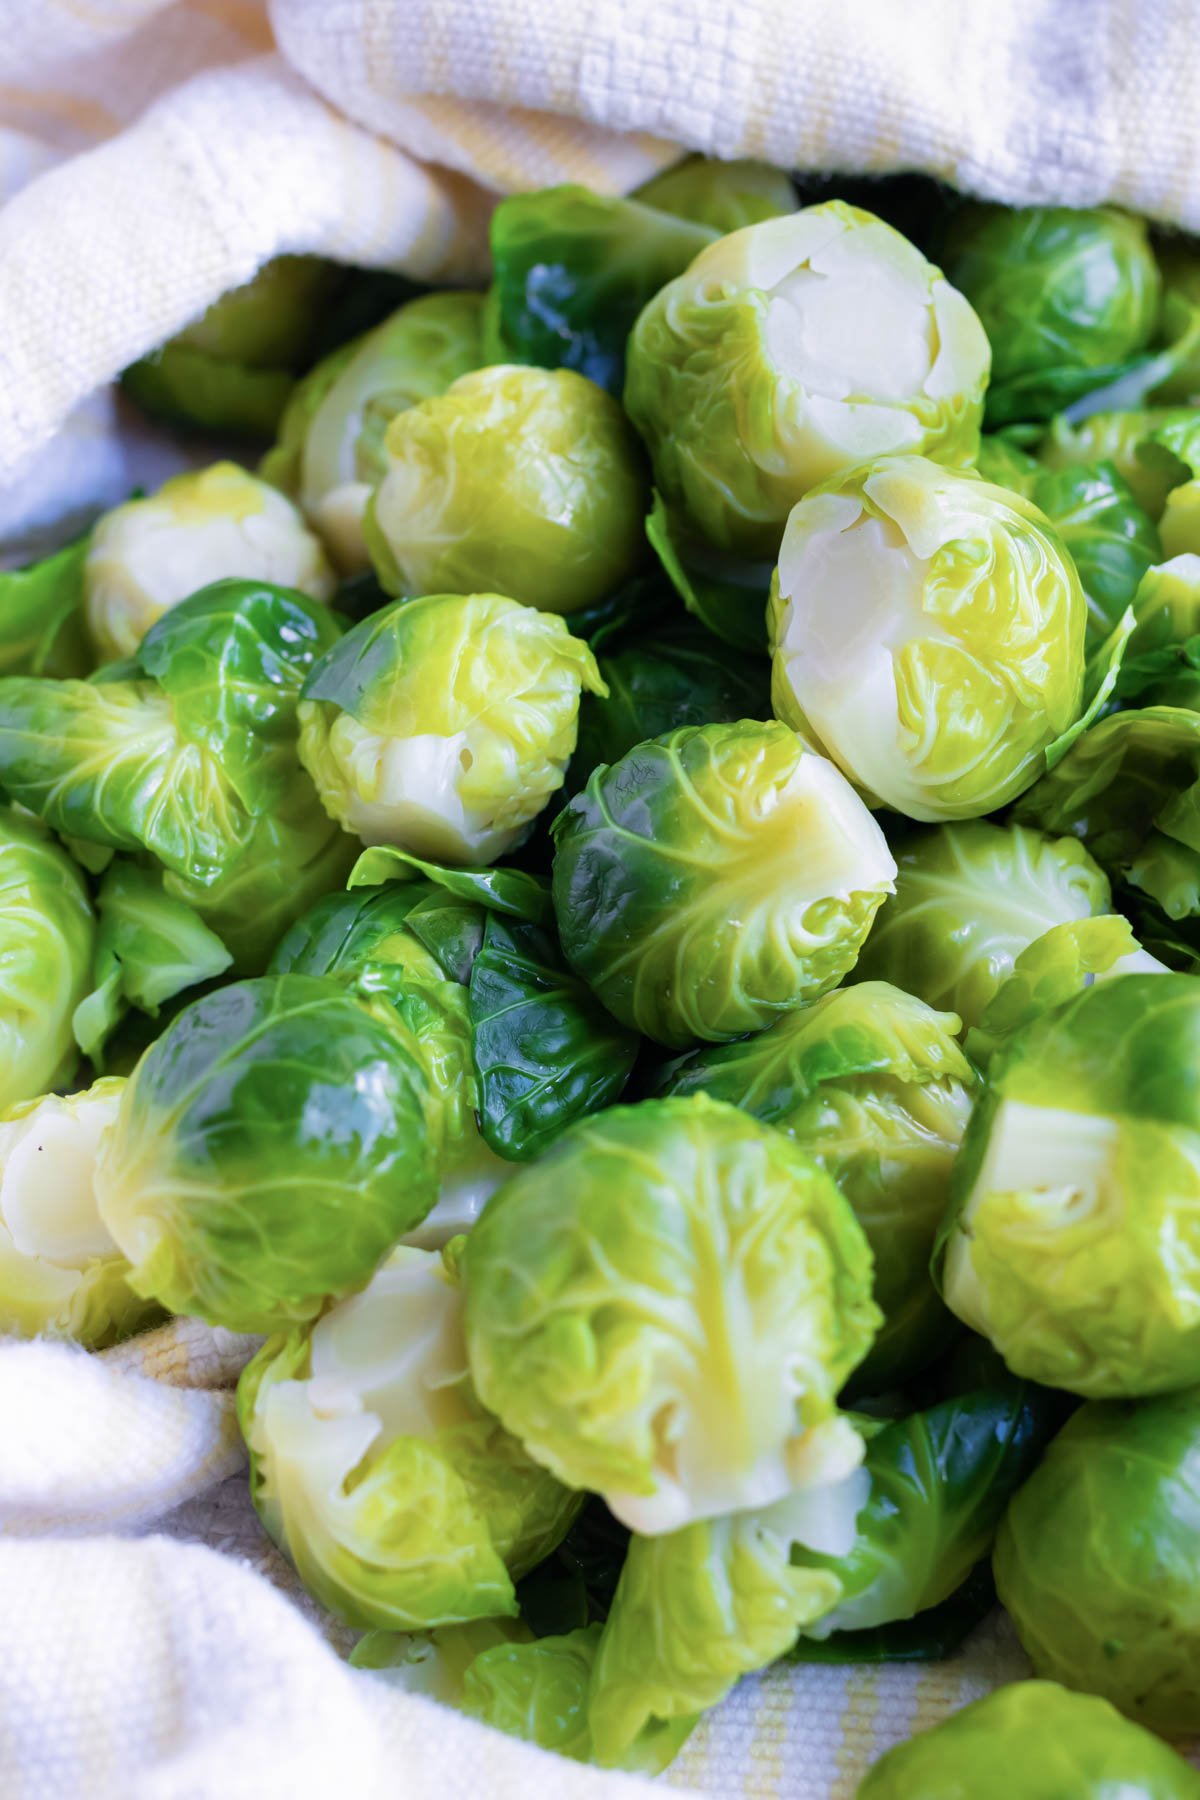 Brussels sprouts in a white towel.